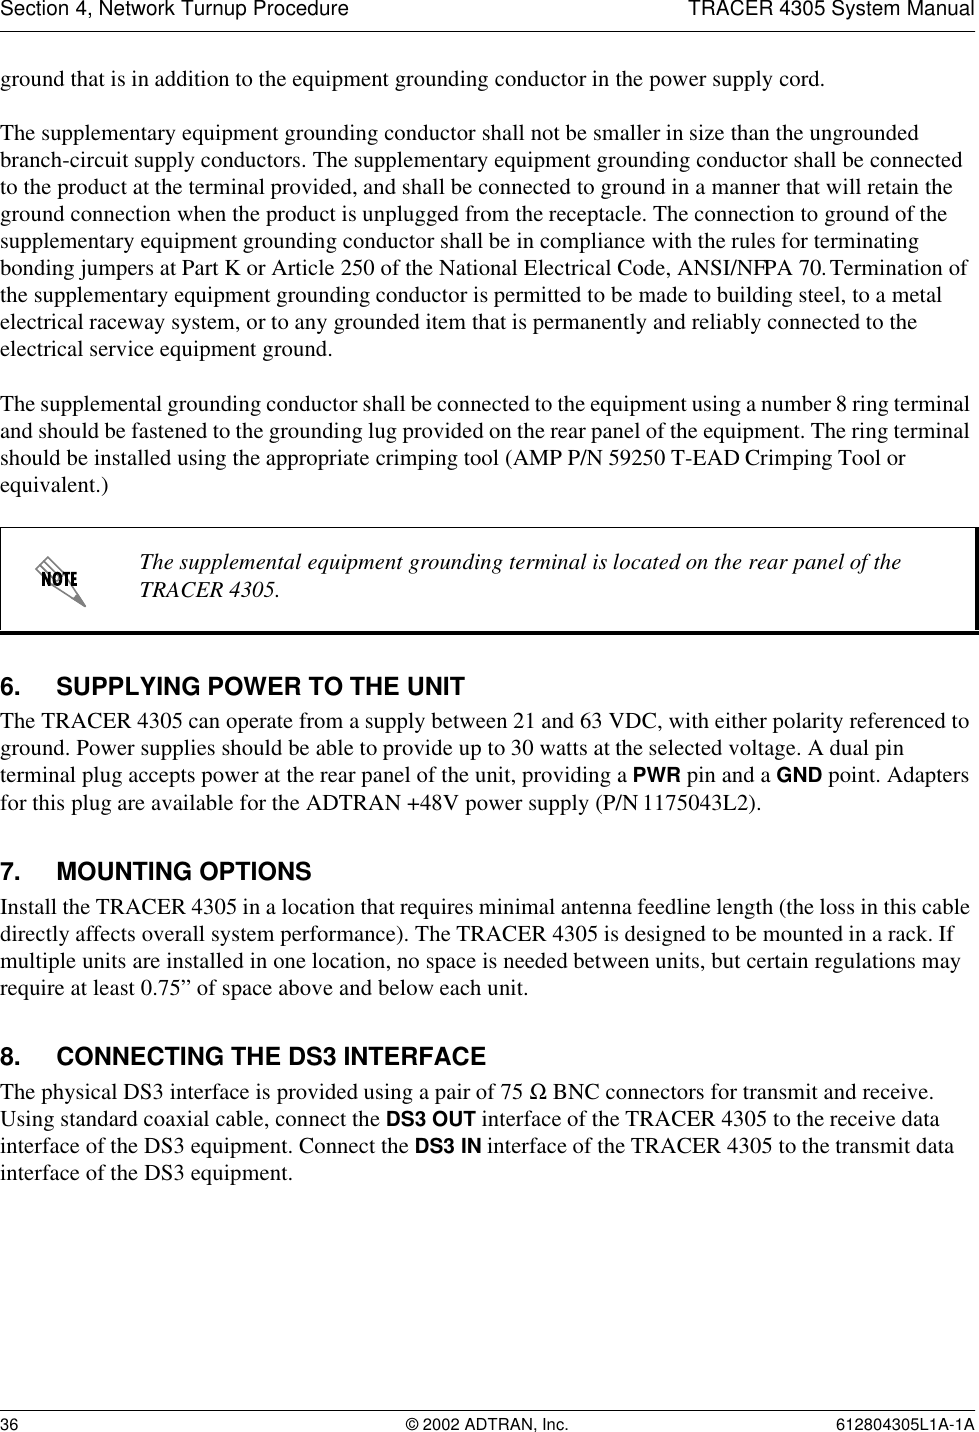 Section 4, Network Turnup Procedure TRACER 4305 System Manual36 © 2002 ADTRAN, Inc. 612804305L1A-1Aground that is in addition to the equipment grounding conductor in the power supply cord.The supplementary equipment grounding conductor shall not be smaller in size than the ungrounded branch-circuit supply conductors. The supplementary equipment grounding conductor shall be connected to the product at the terminal provided, and shall be connected to ground in a manner that will retain the ground connection when the product is unplugged from the receptacle. The connection to ground of the supplementary equipment grounding conductor shall be in compliance with the rules for terminating bonding jumpers at Part K or Article 250 of the National Electrical Code, ANSI/NFPA 70. Termination of the supplementary equipment grounding conductor is permitted to be made to building steel, to a metal electrical raceway system, or to any grounded item that is permanently and reliably connected to the electrical service equipment ground.The supplemental grounding conductor shall be connected to the equipment using a number 8 ring terminal and should be fastened to the grounding lug provided on the rear panel of the equipment. The ring terminal should be installed using the appropriate crimping tool (AMP P/N 59250 T-EAD Crimping Tool or equivalent.)6. SUPPLYING POWER TO THE UNITThe TRACER 4305 can operate from a supply between 21 and 63 VDC, with either polarity referenced to ground. Power supplies should be able to provide up to 30 watts at the selected voltage. A dual pin terminal plug accepts power at the rear panel of the unit, providing a PWR pin and a GND point. Adapters for this plug are available for the ADTRAN +48V power supply (P/N 1175043L2).7. MOUNTING OPTIONSInstall the TRACER 4305 in a location that requires minimal antenna feedline length (the loss in this cable directly affects overall system performance). The TRACER 4305 is designed to be mounted in a rack. If multiple units are installed in one location, no space is needed between units, but certain regulations may require at least 0.75” of space above and below each unit.8. CONNECTING THE DS3 INTERFACEThe physical DS3 interface is provided using a pair of 75 Ω BNC connectors for transmit and receive. Using standard coaxial cable, connect the DS3 OUT interface of the TRACER 4305 to the receive data interface of the DS3 equipment. Connect the DS3 IN interface of the TRACER 4305 to the transmit data interface of the DS3 equipment.The supplemental equipment grounding terminal is located on the rear panel of the TRACER 4305.